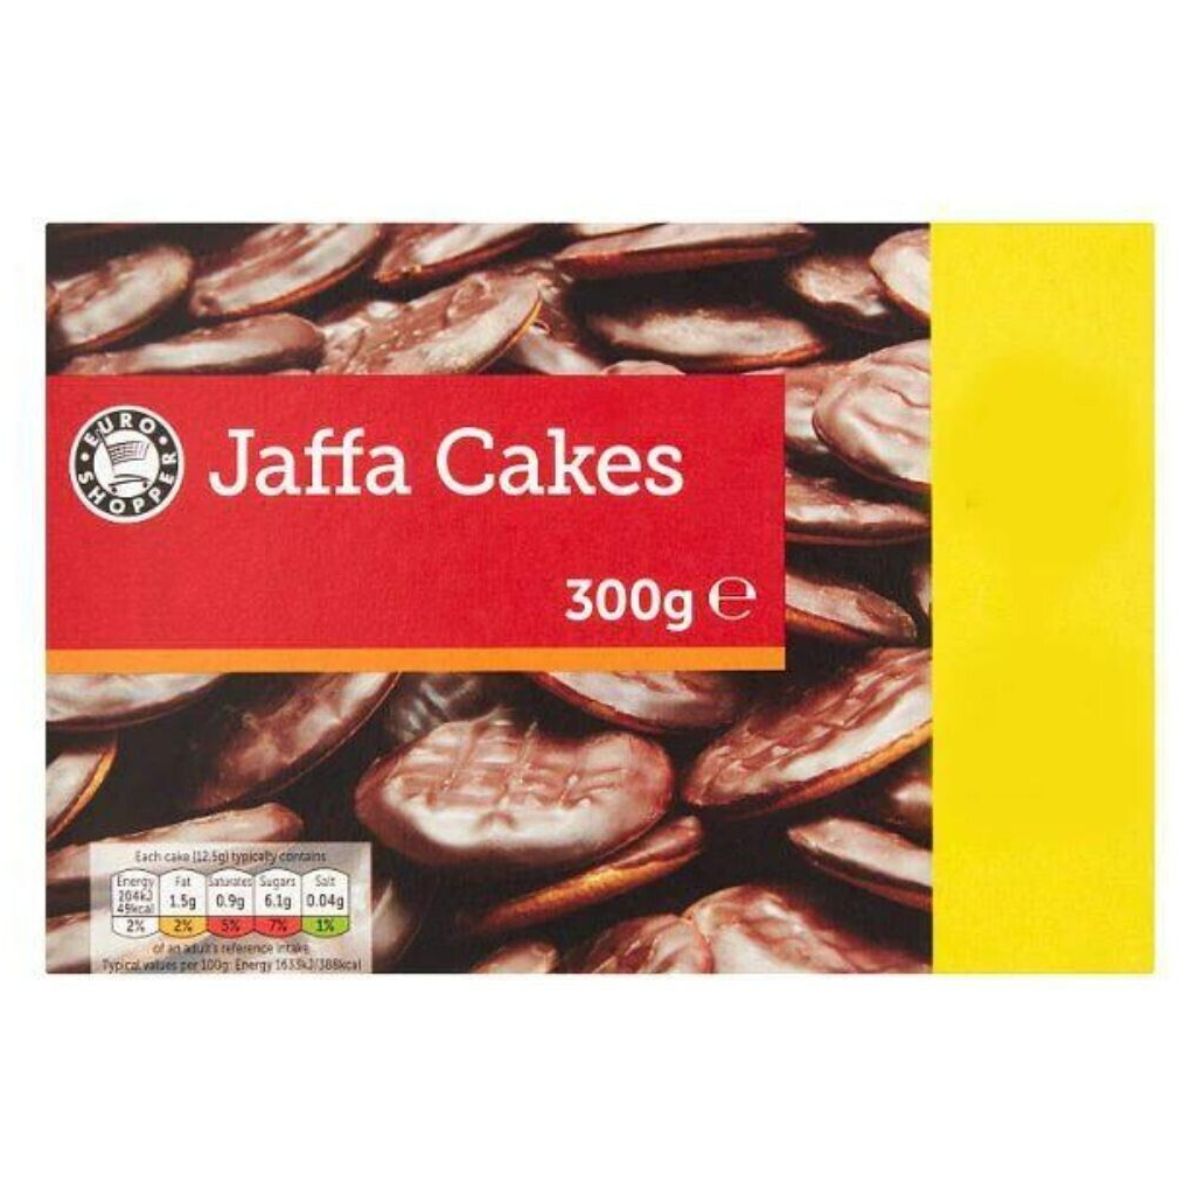 Packaging of Euro Shopper - Caffa Cake - 300g, featuring a close-up image of the cakes and a prominent label displaying the product name and weight.